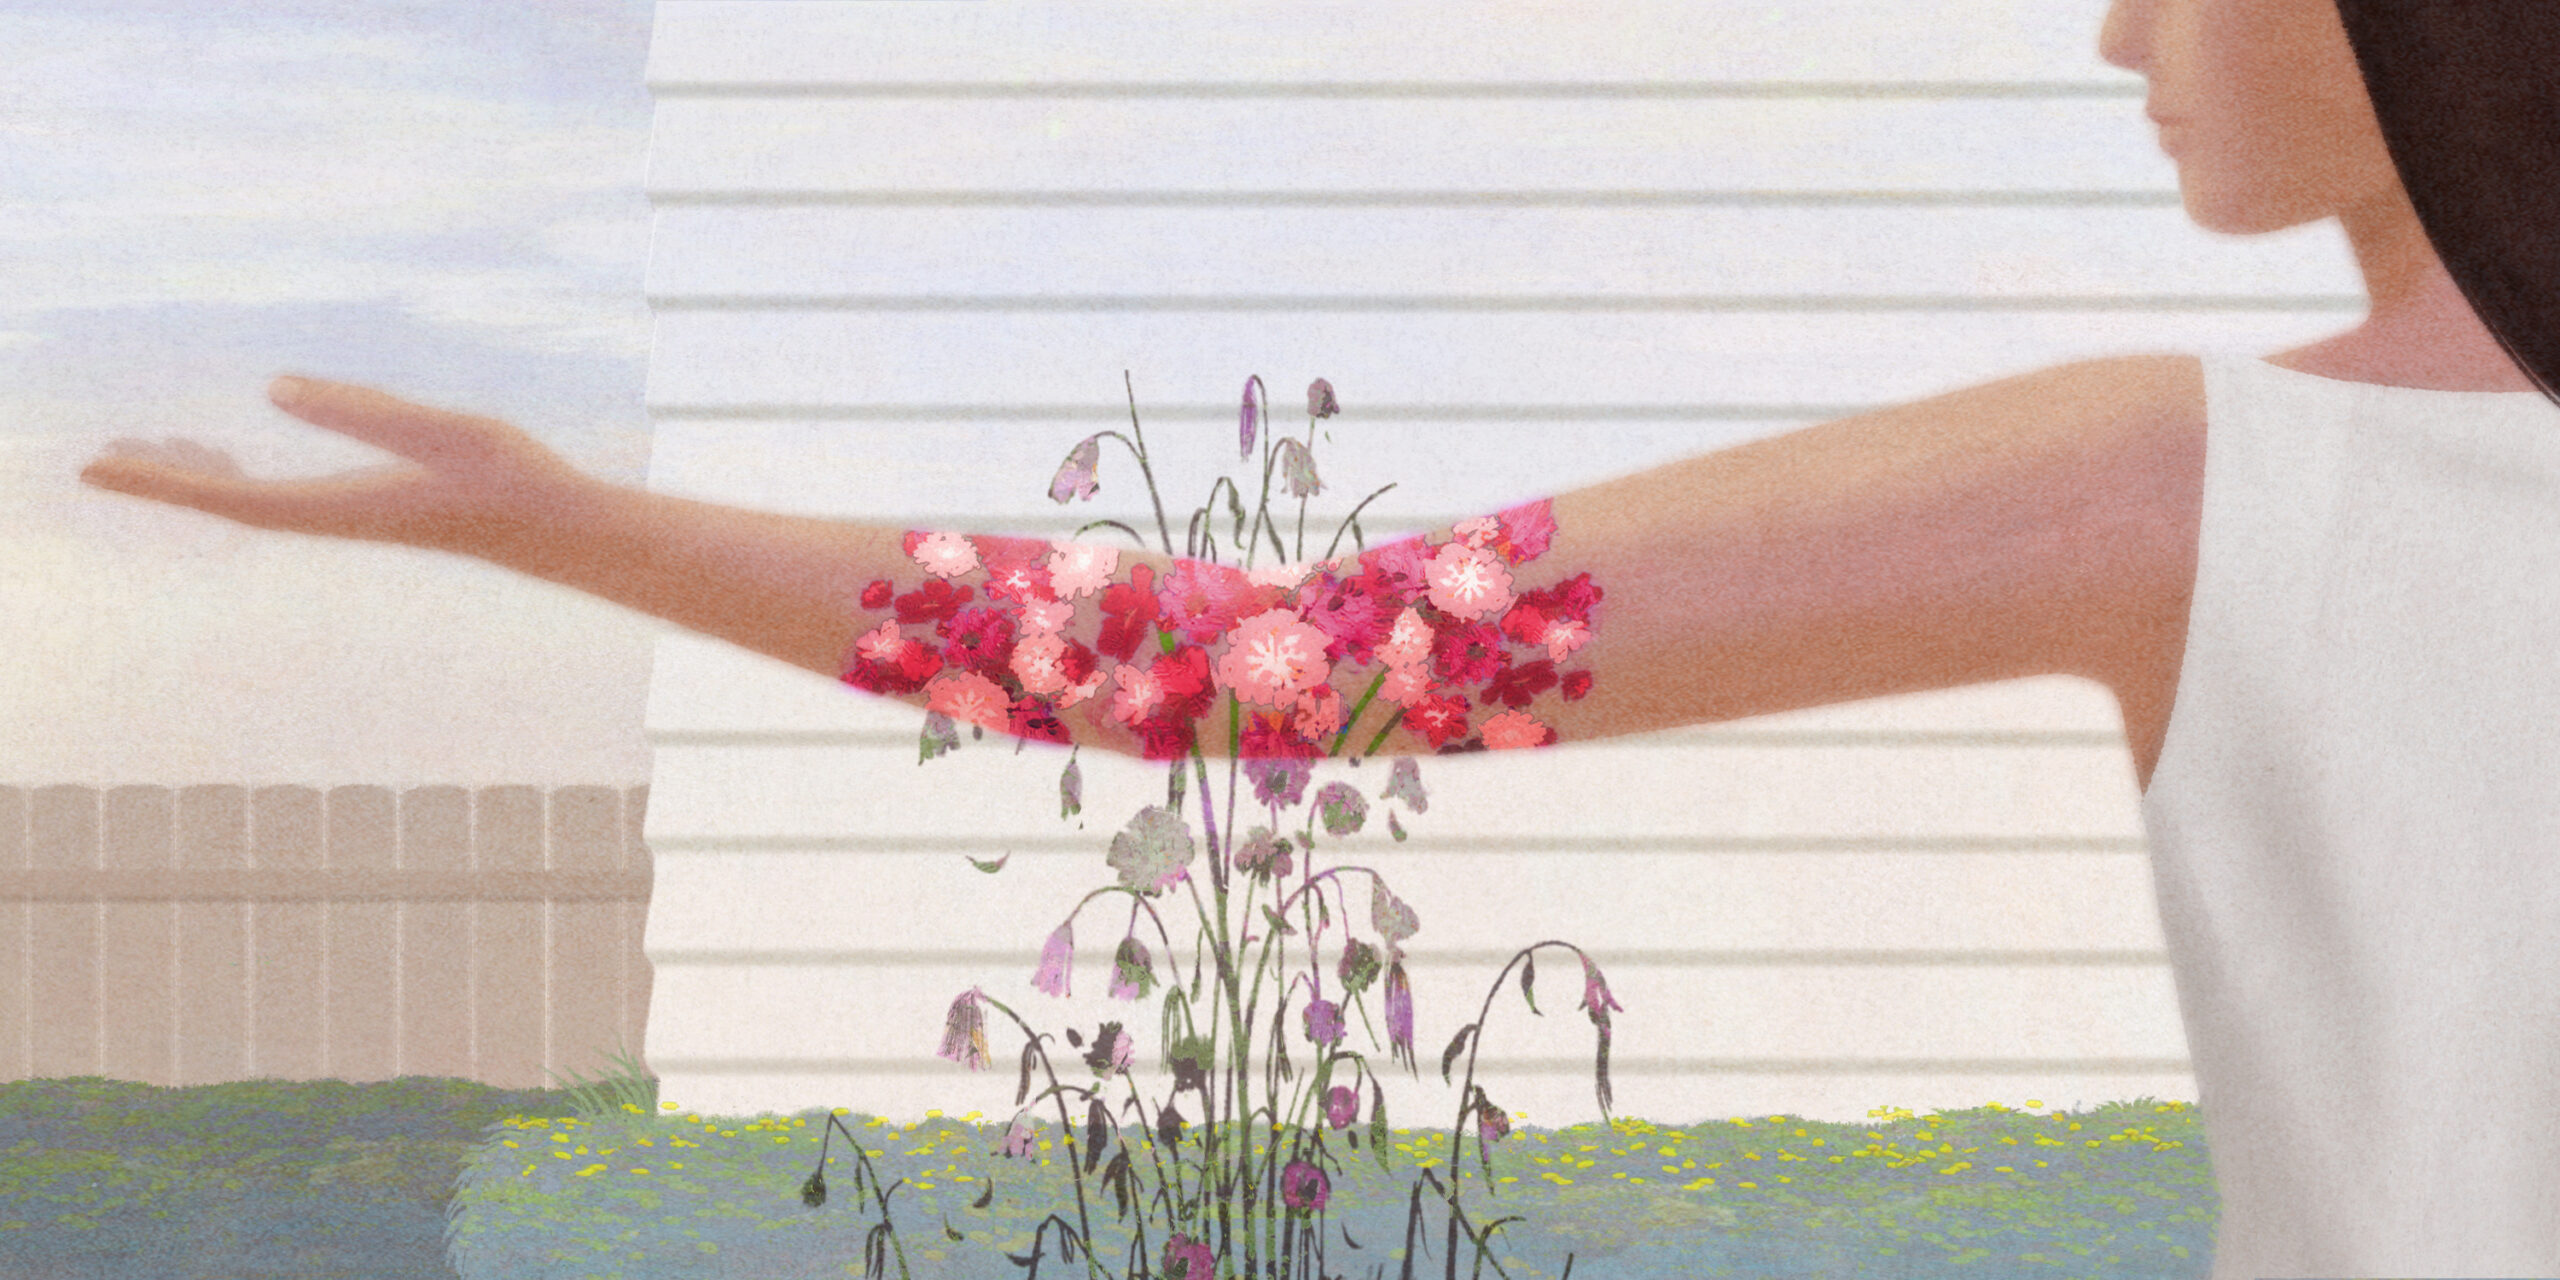 An illustration of a woman in a white dress reaching her arm out. In the background, a dead flower bush emerges, but where her arm overlaps with it, the flowers are alive as a vibrant, colorful tattoo with flowers in various shades of pink. There is a white house in the background.